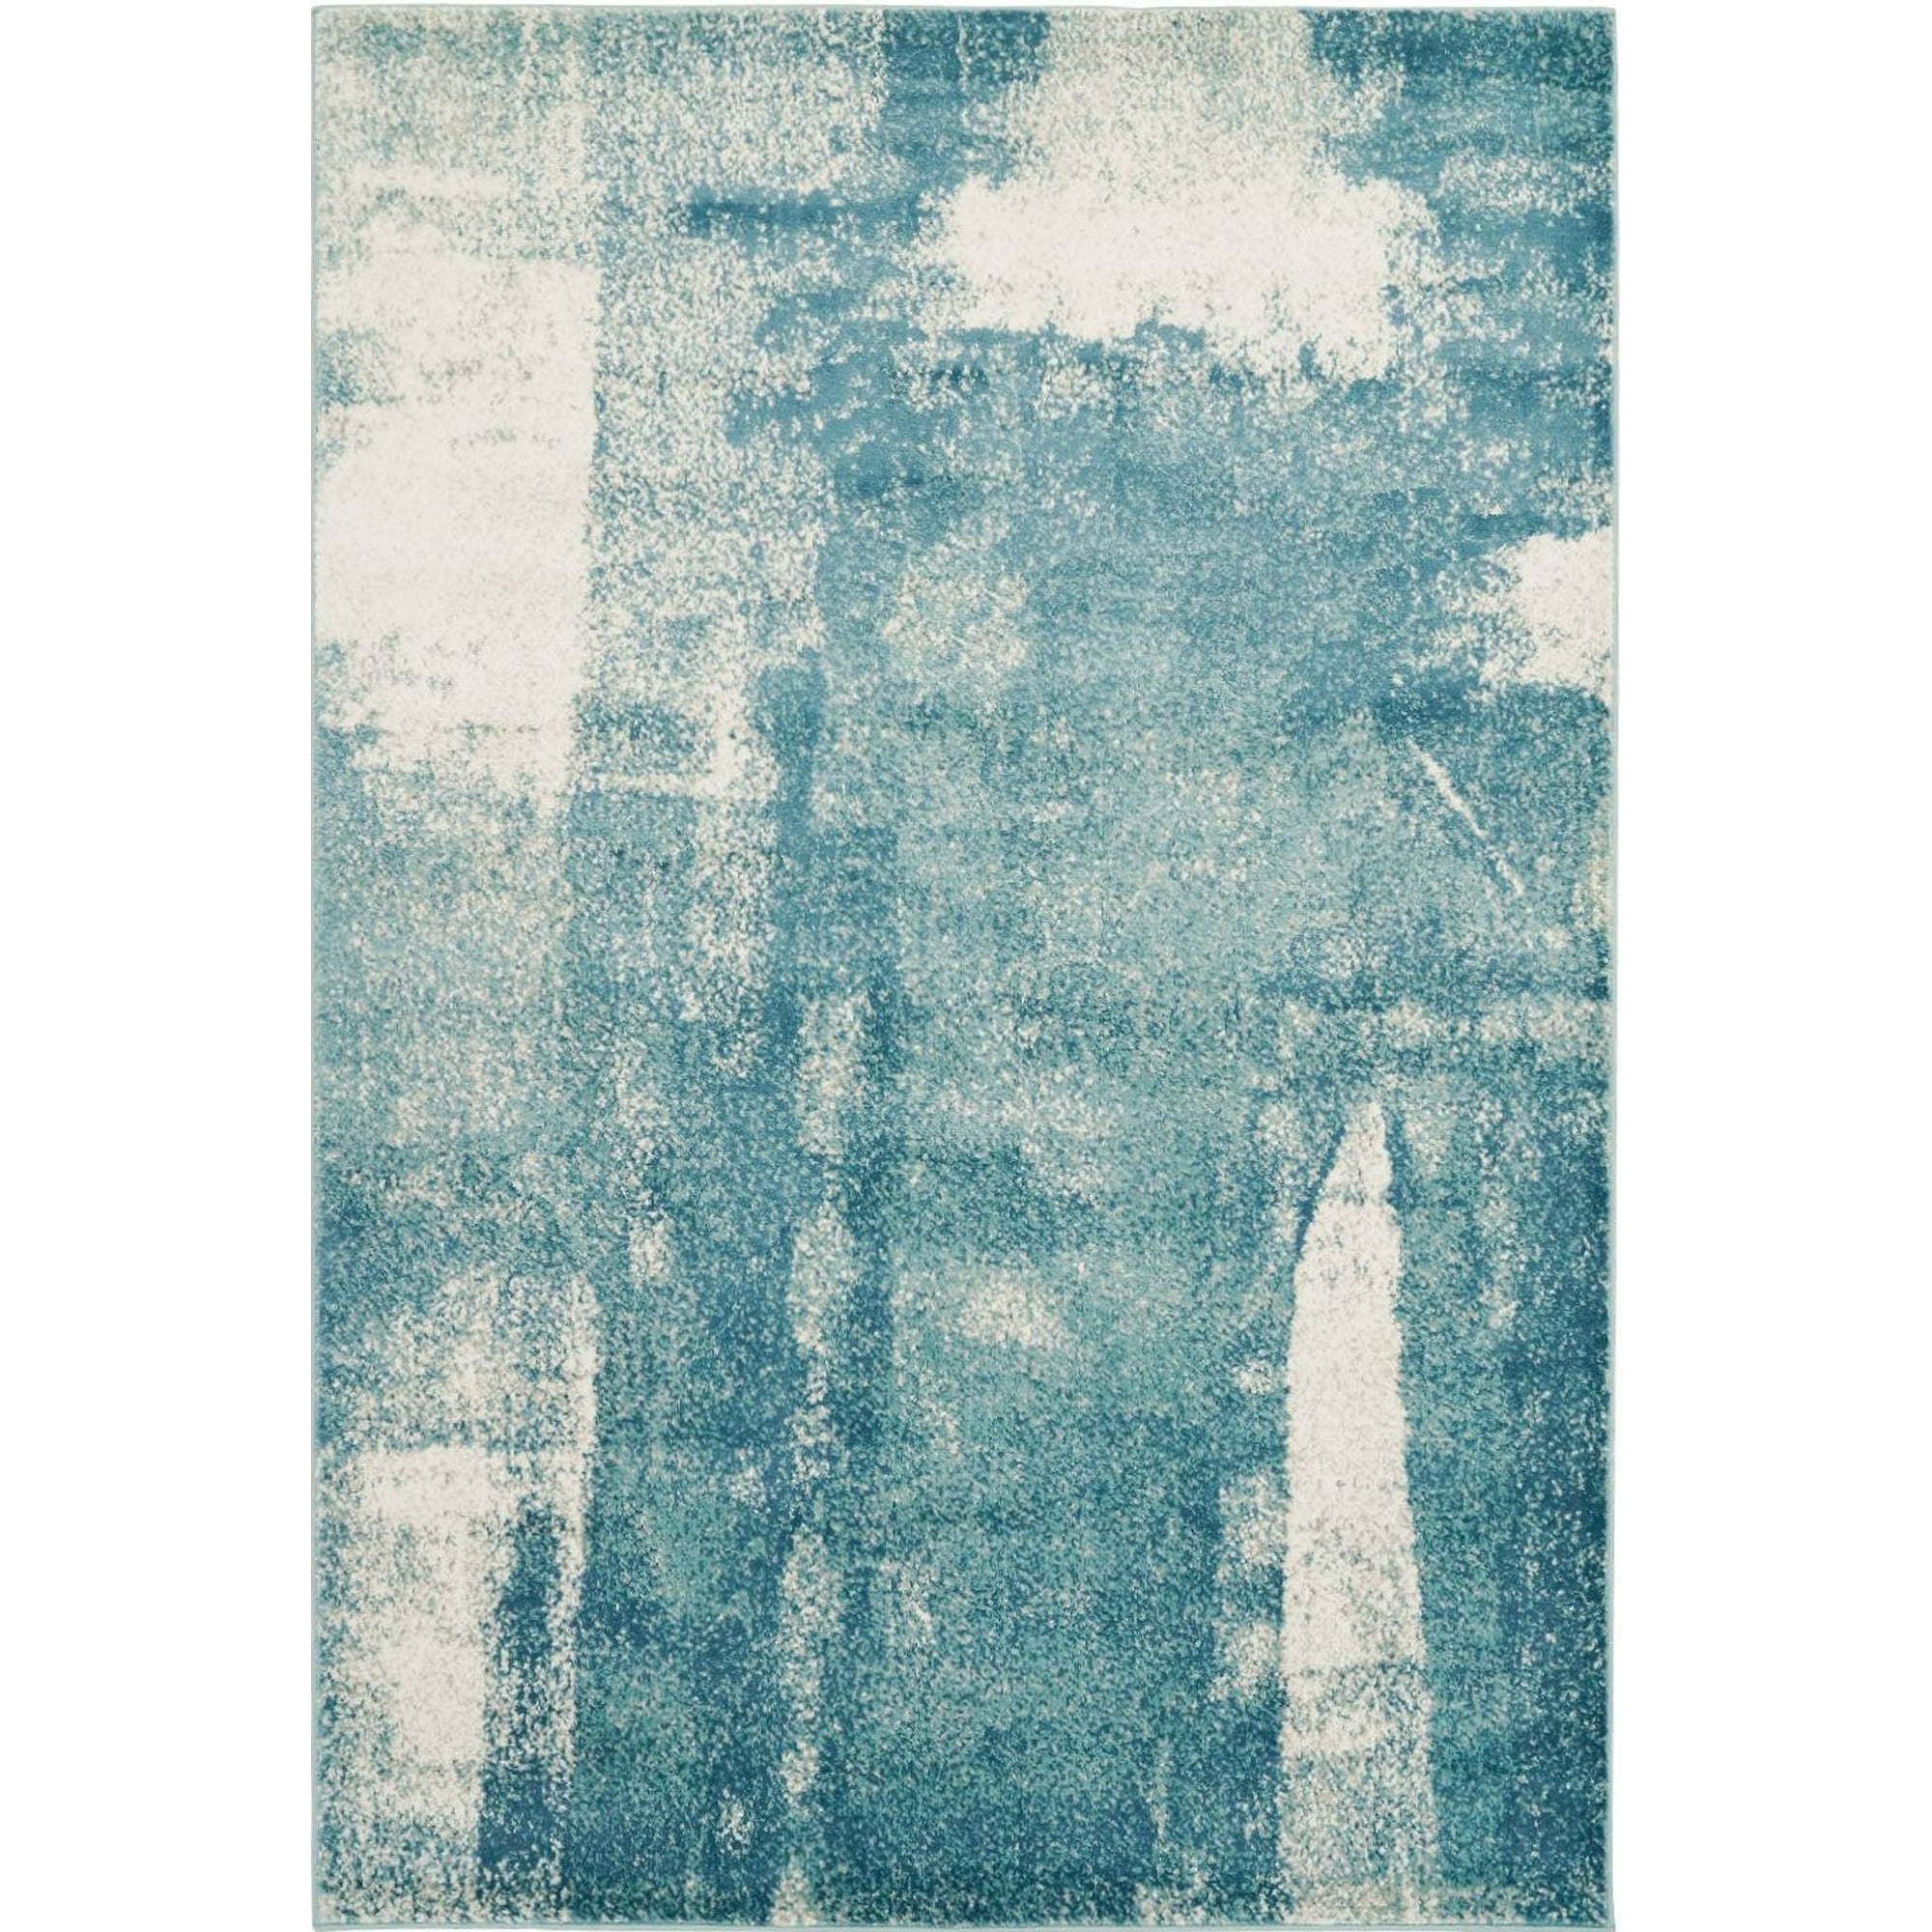 Ladole Rugs Turquoise Blue And Black, Area Rugs Turquoise